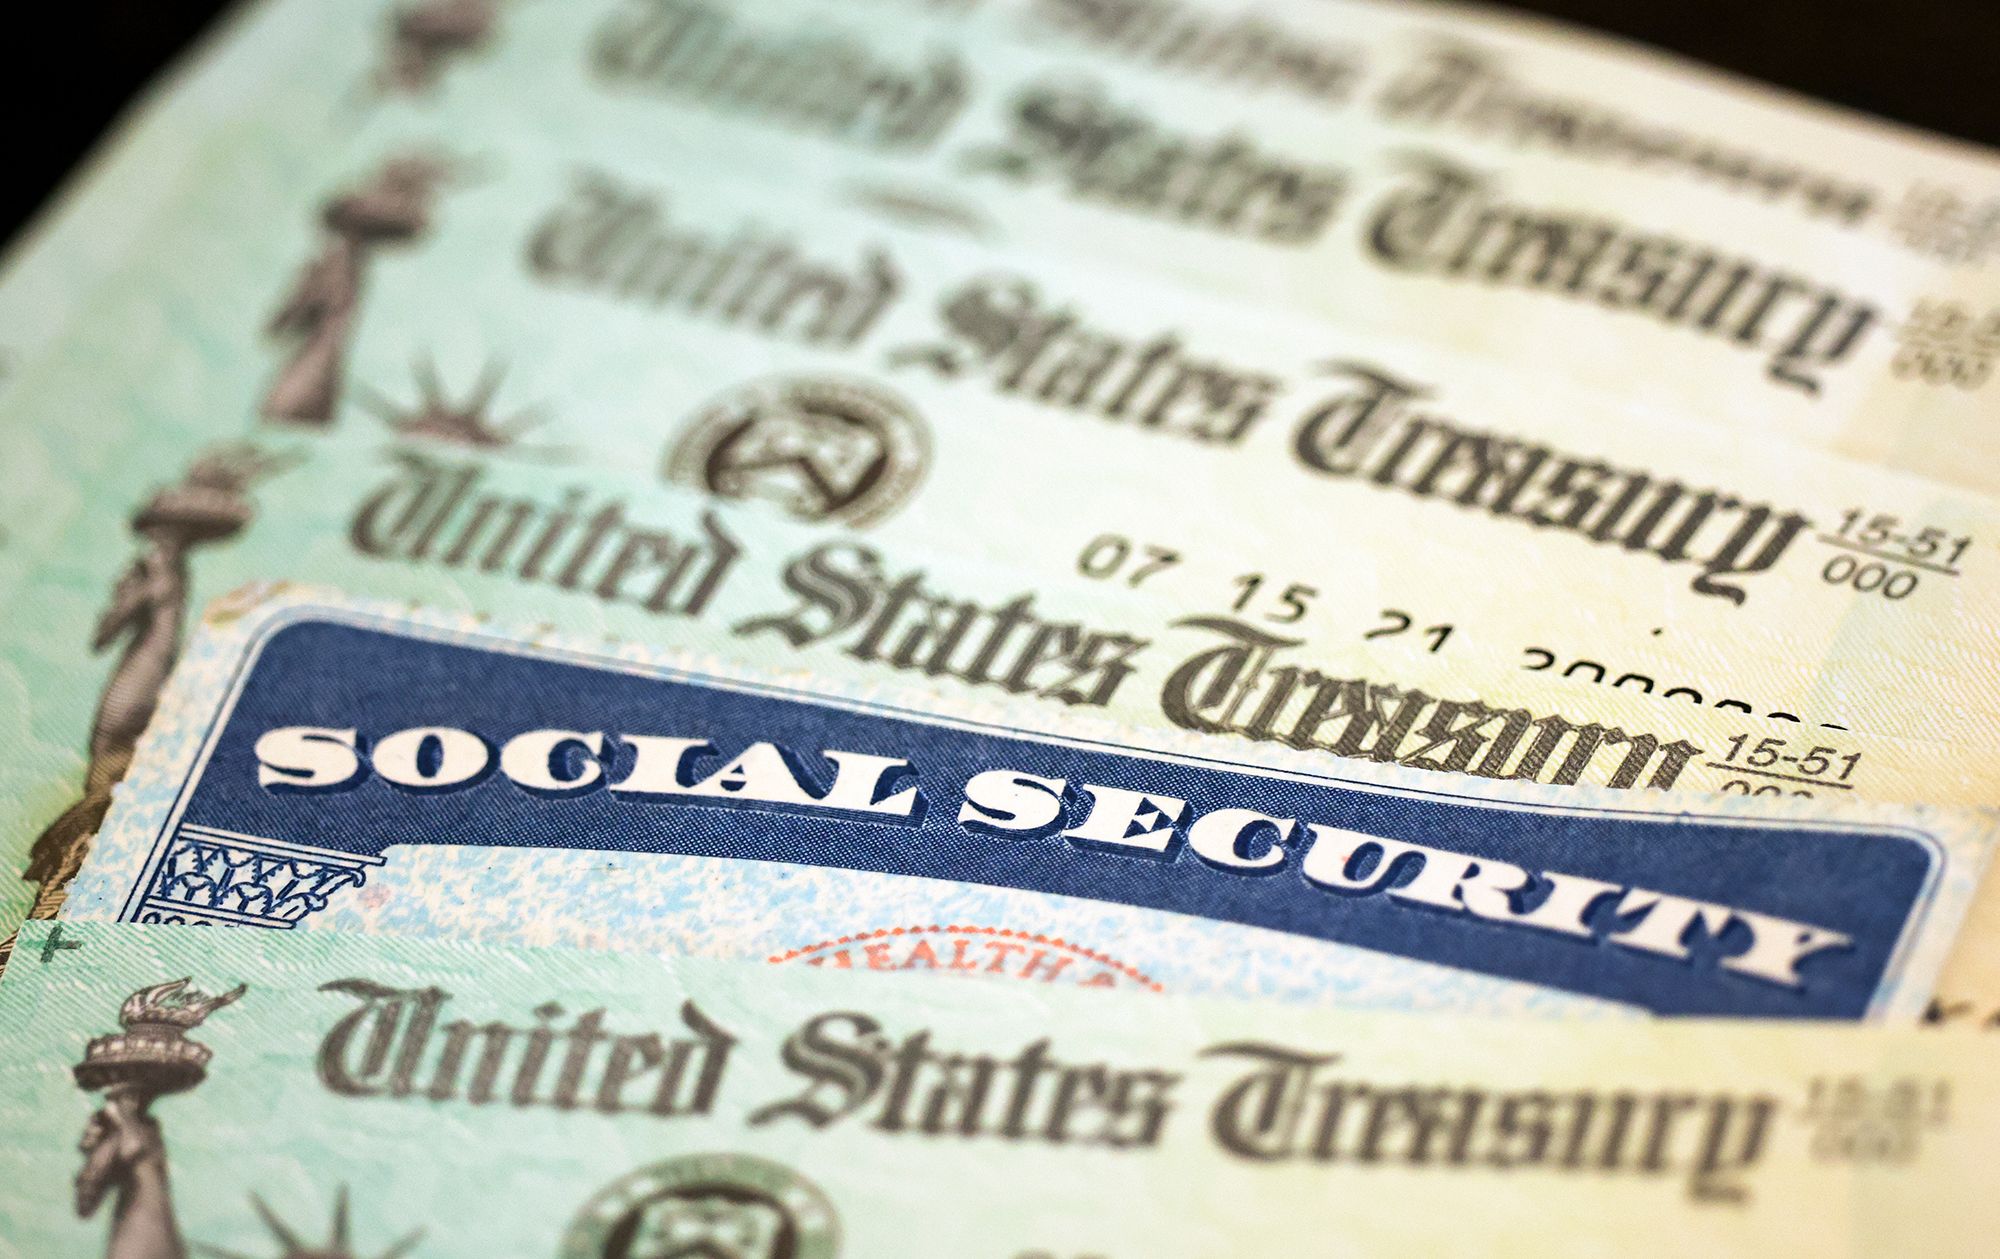 Should We Eliminate the Social Security Tax Cap? Here Are the Pros and Cons